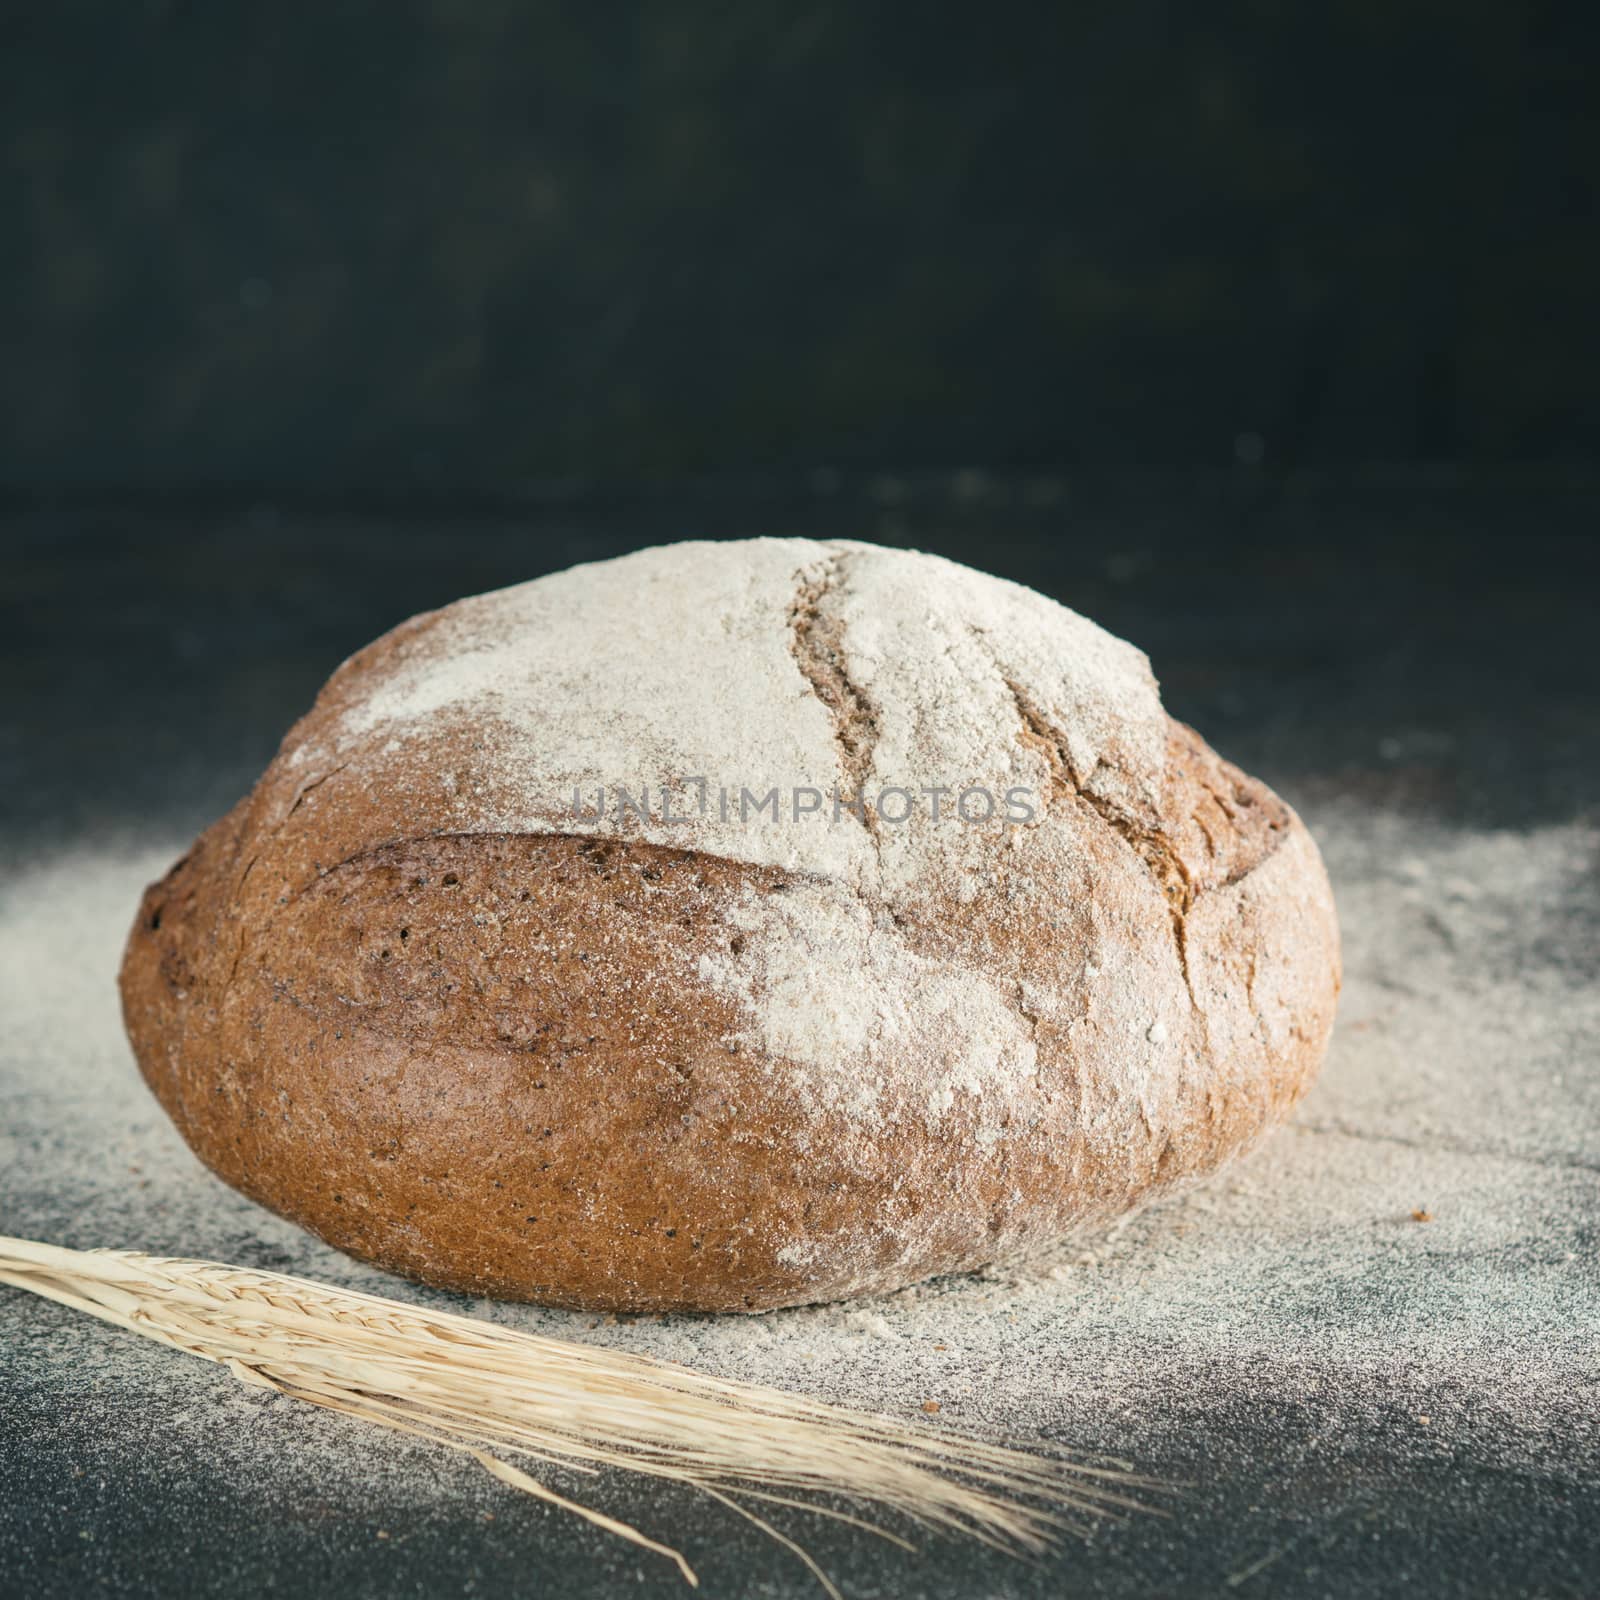 Whole homemade sourdough rye bread with rye spike and rye flour and on black textured background. Copy space. Low key